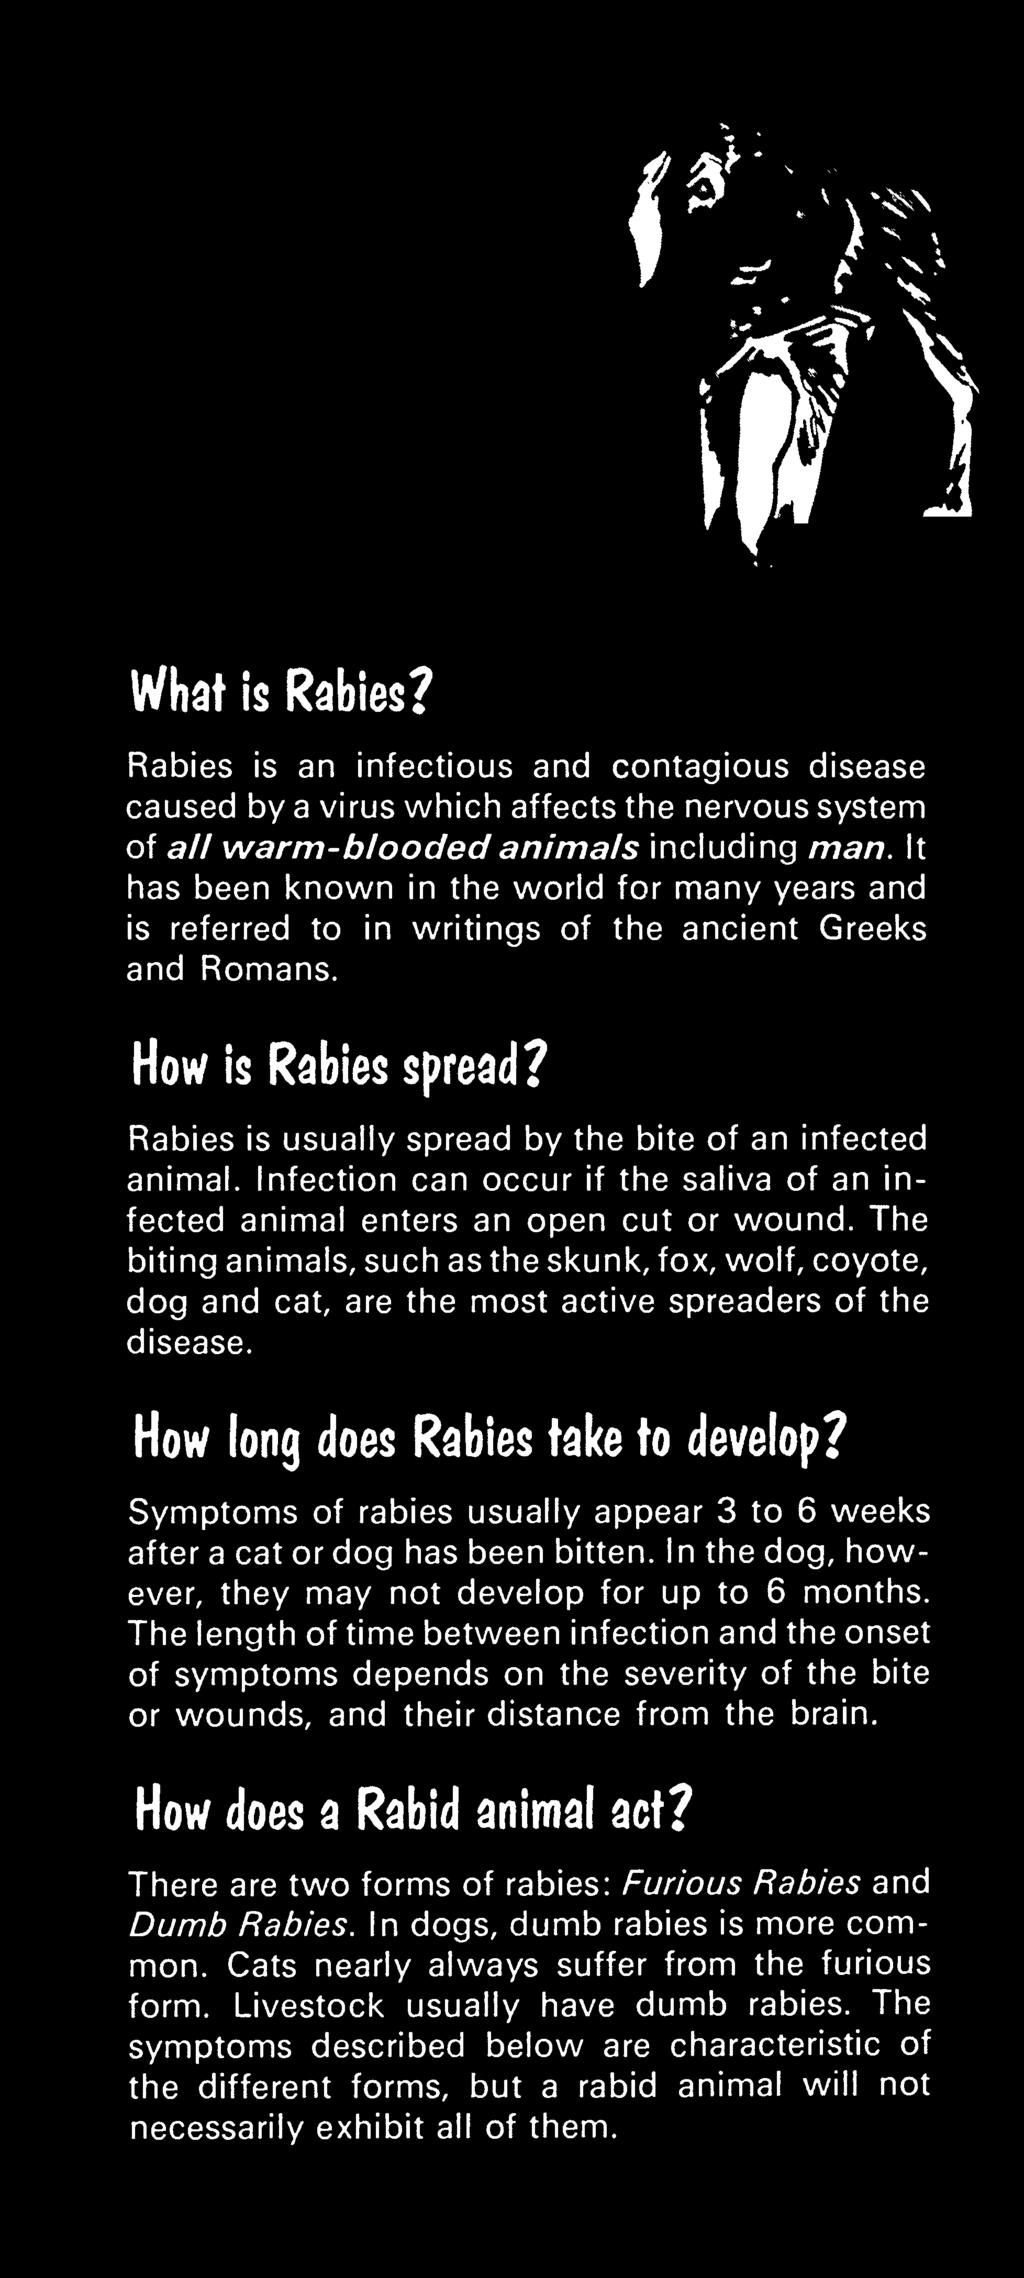 Symptoms of rabies usually appear 3 to 6 weeks after a cat or dog has been bitten. In the dog, however, they may not develop for up to 6 months.